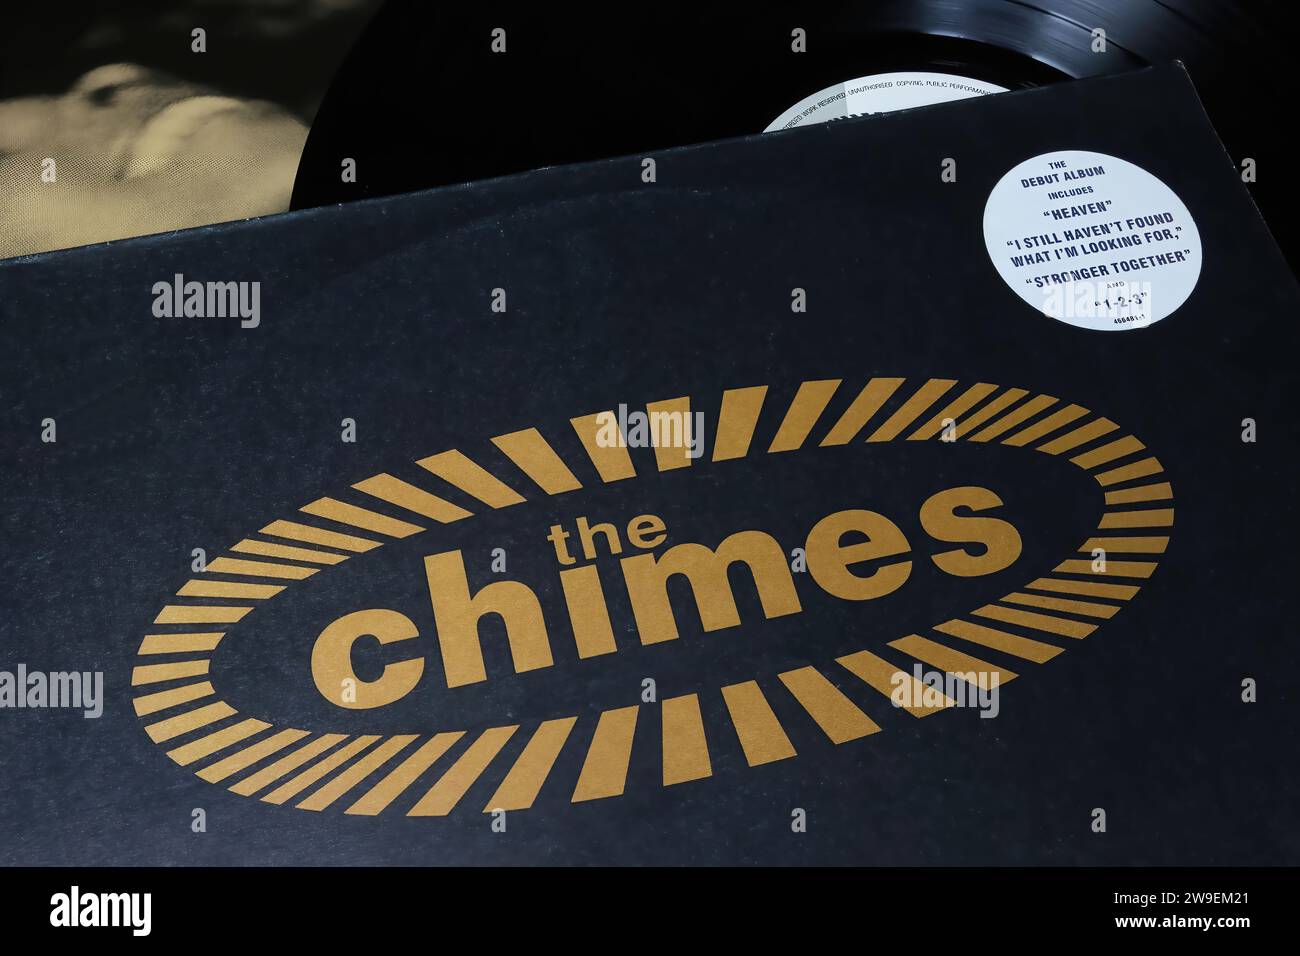 Viersen, Germany - May 9. 2023: Closeup of The Chimes british soul band vinyl record cover album Stock Photo